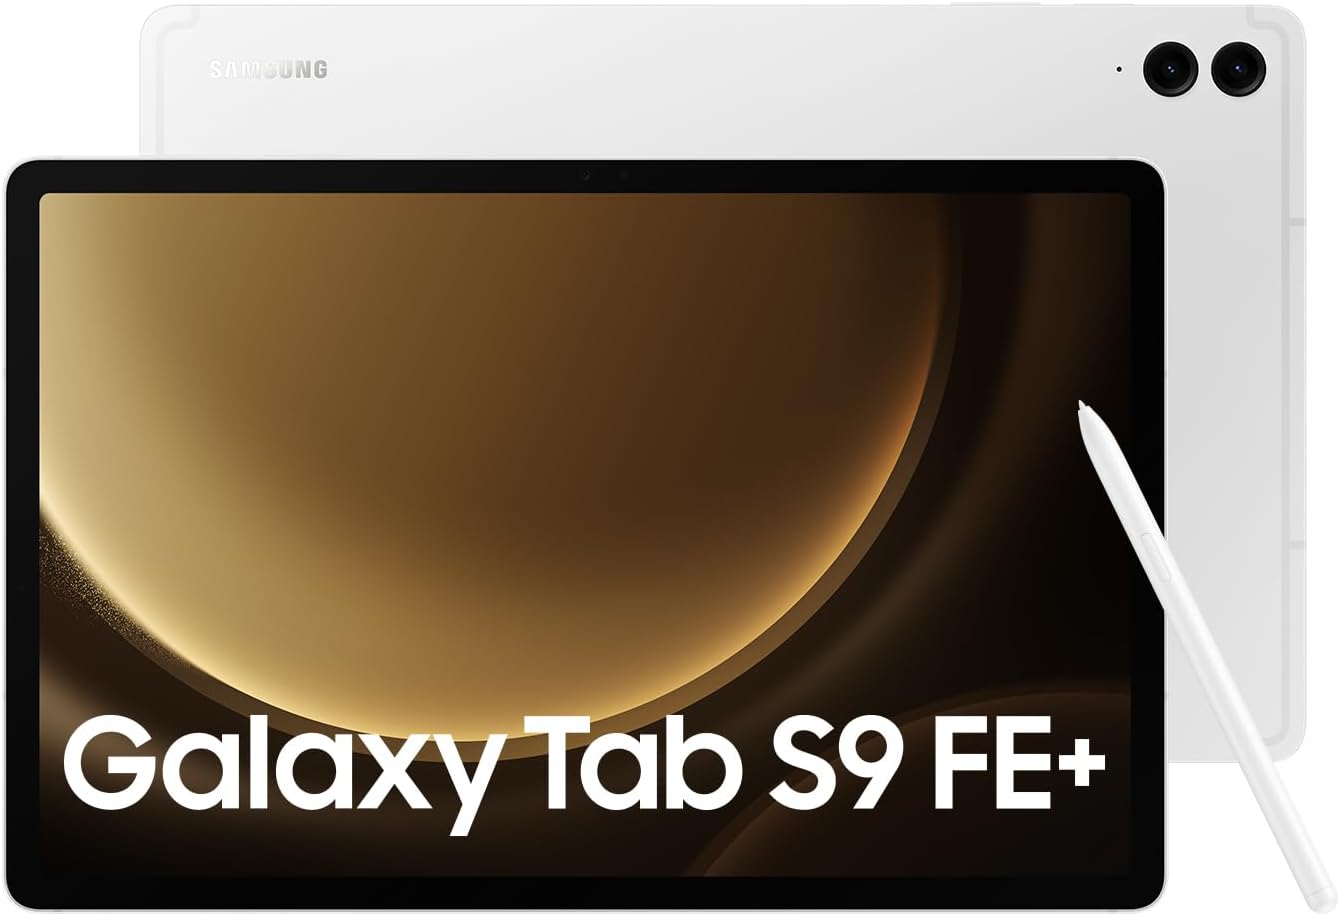 Samsung Galaxy Tab S9 FE+ 12.4 Silver Tablet - Colorful design for creative possibilities and entertainment. 8806095159225